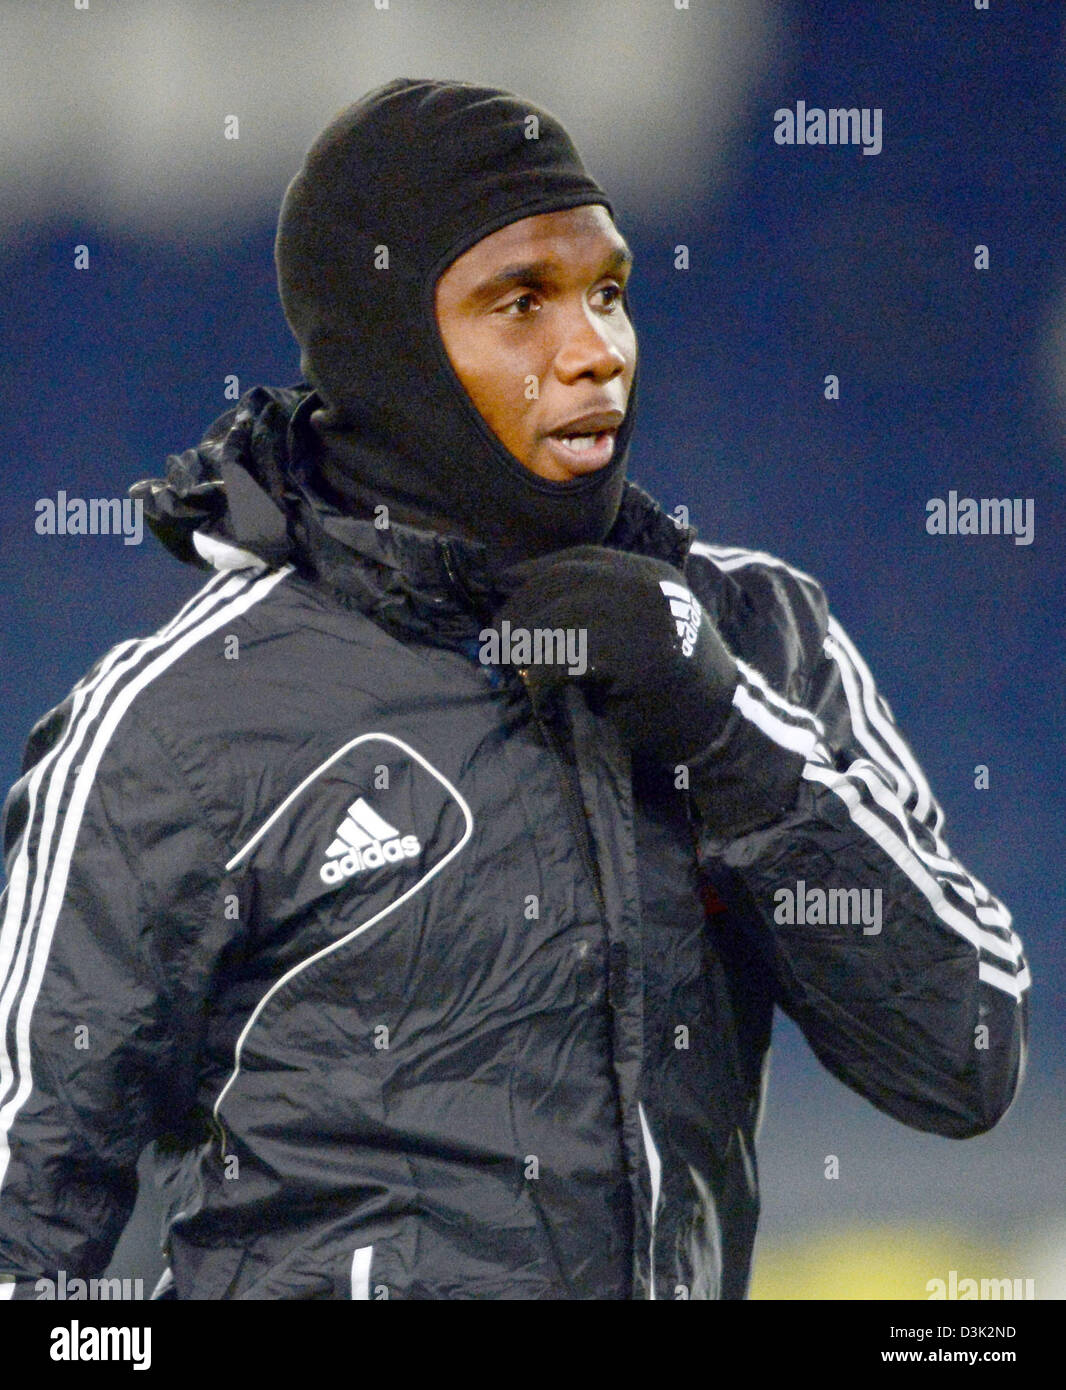 Player of soccer club FC Anzhi Makhachkala, Samuel Eto'o, takes part in a training session for the Europa League soccer match between Hannover 96 at AWD Arena in Hanover, Germany, 20 February 2013. Hannover 96 will play Anzhi Makhachkala on 21 February 2013. Photo: PETER STEFFEN Stock Photo